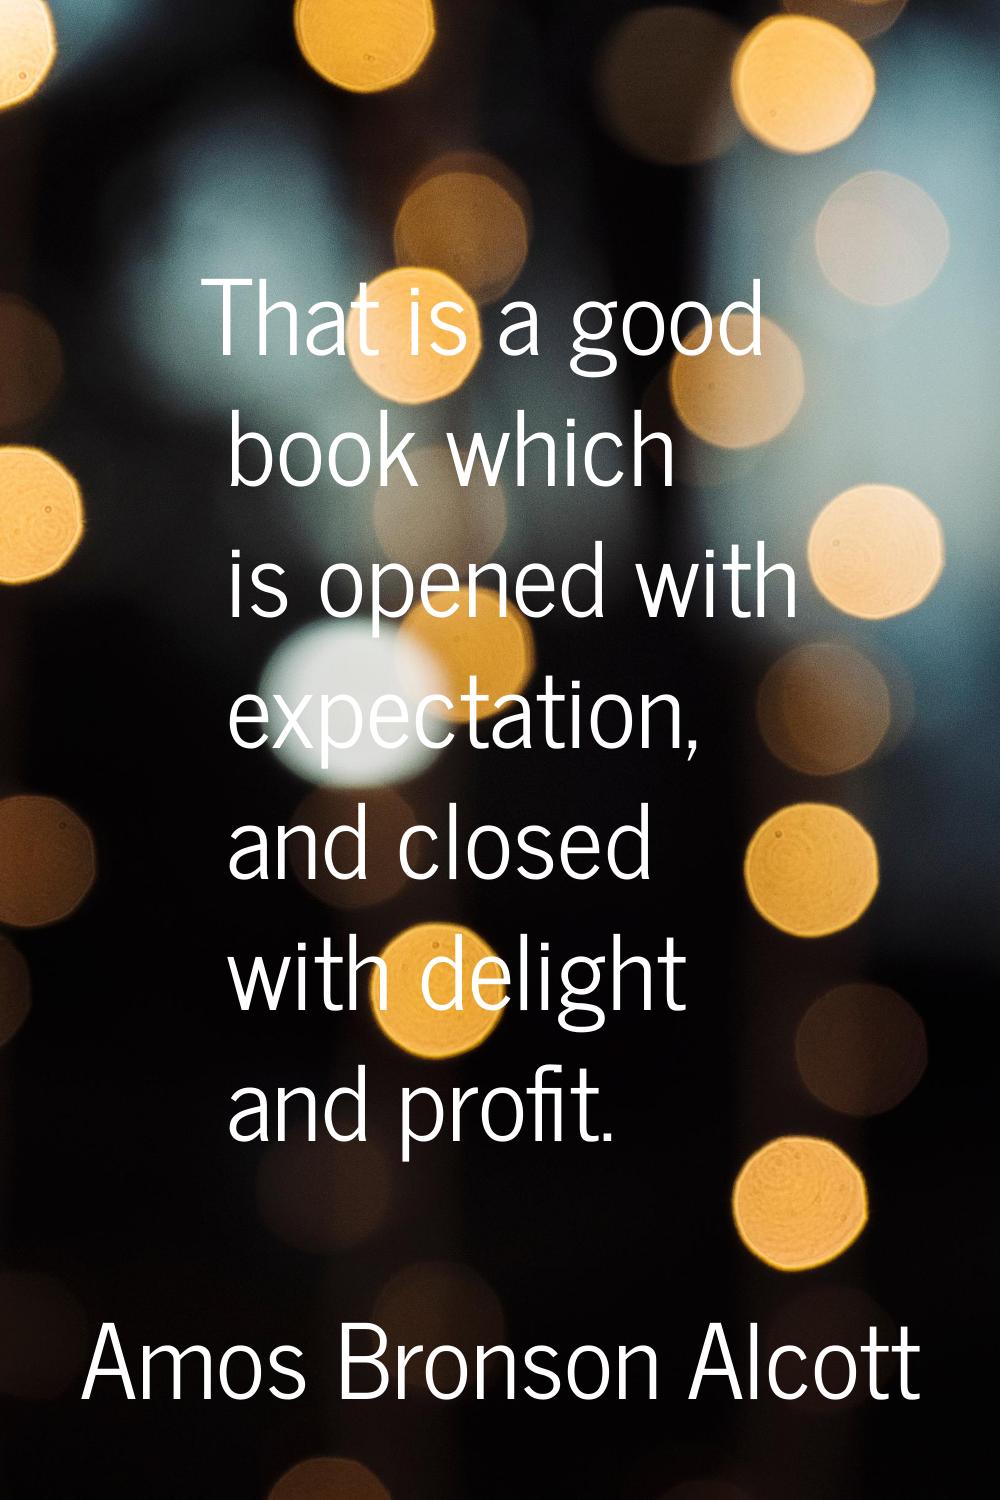 That is a good book which is opened with expectation, and closed with delight and profit.